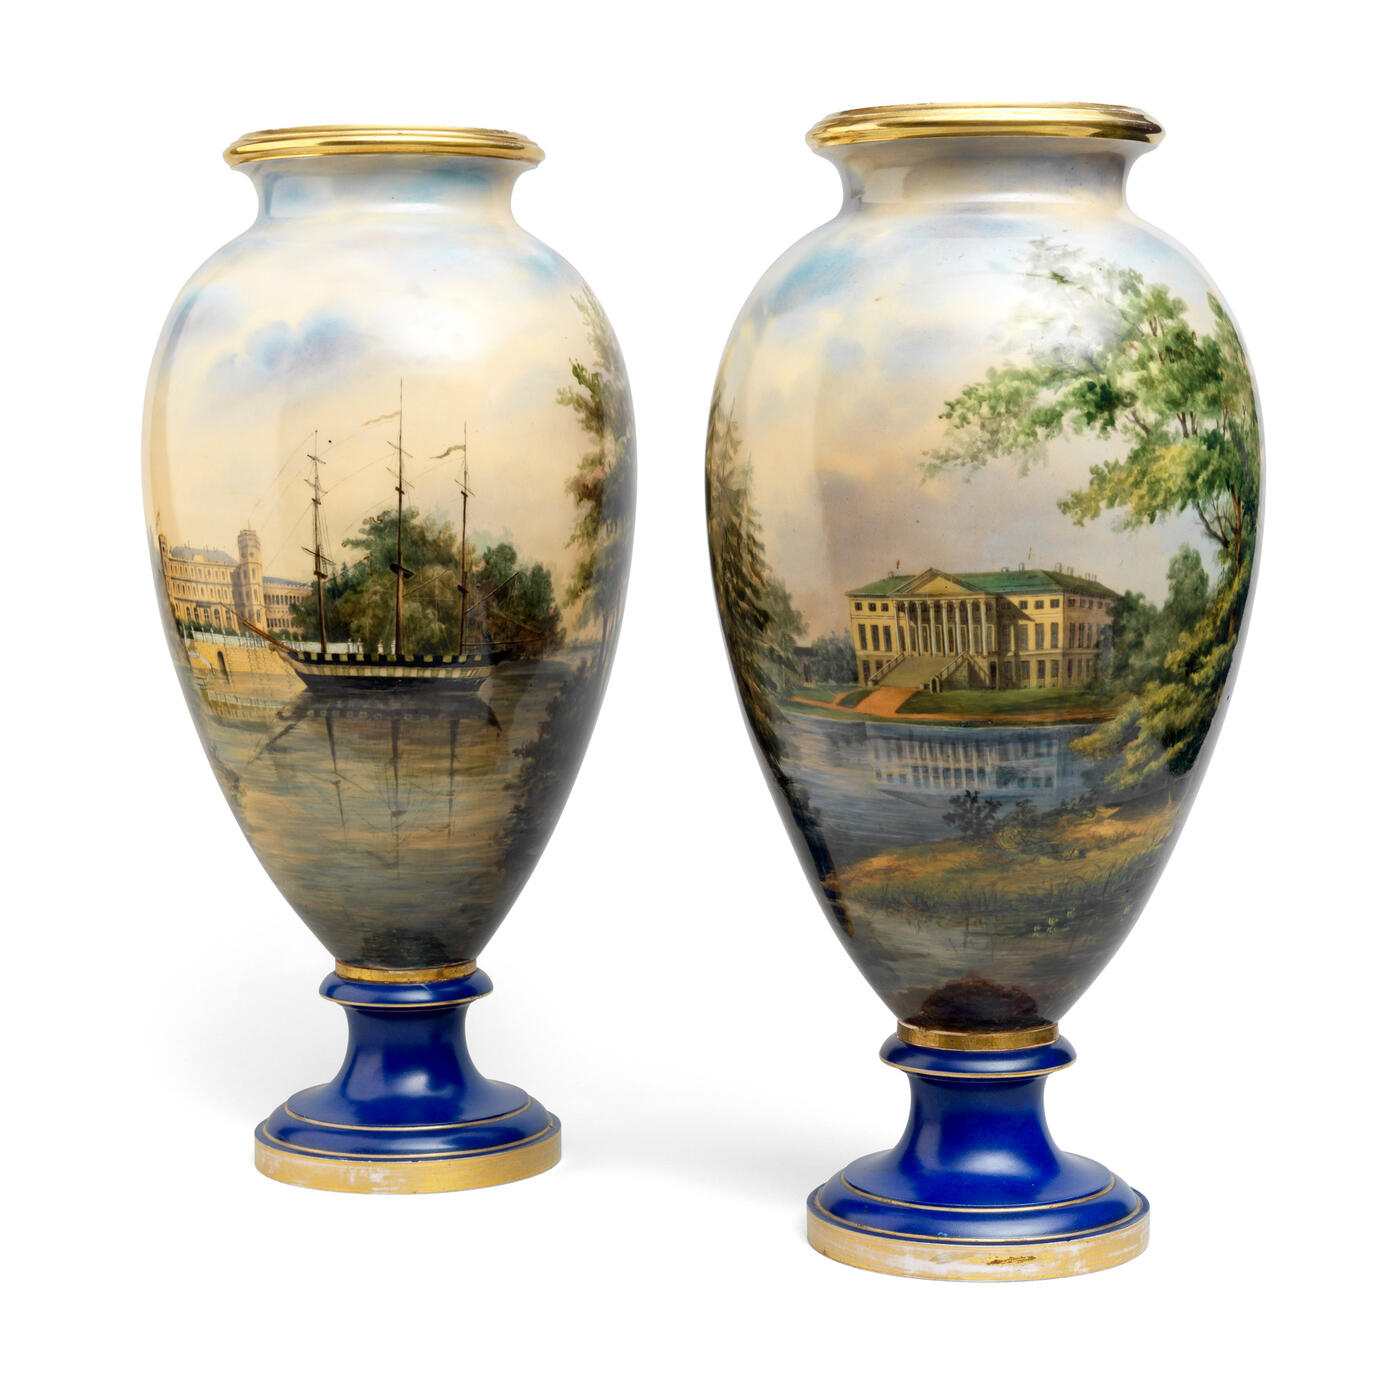 IMPERIAL PORCELAIN MANUFACTORY, PERIOD OF ALEXANDER II (1855–1881)